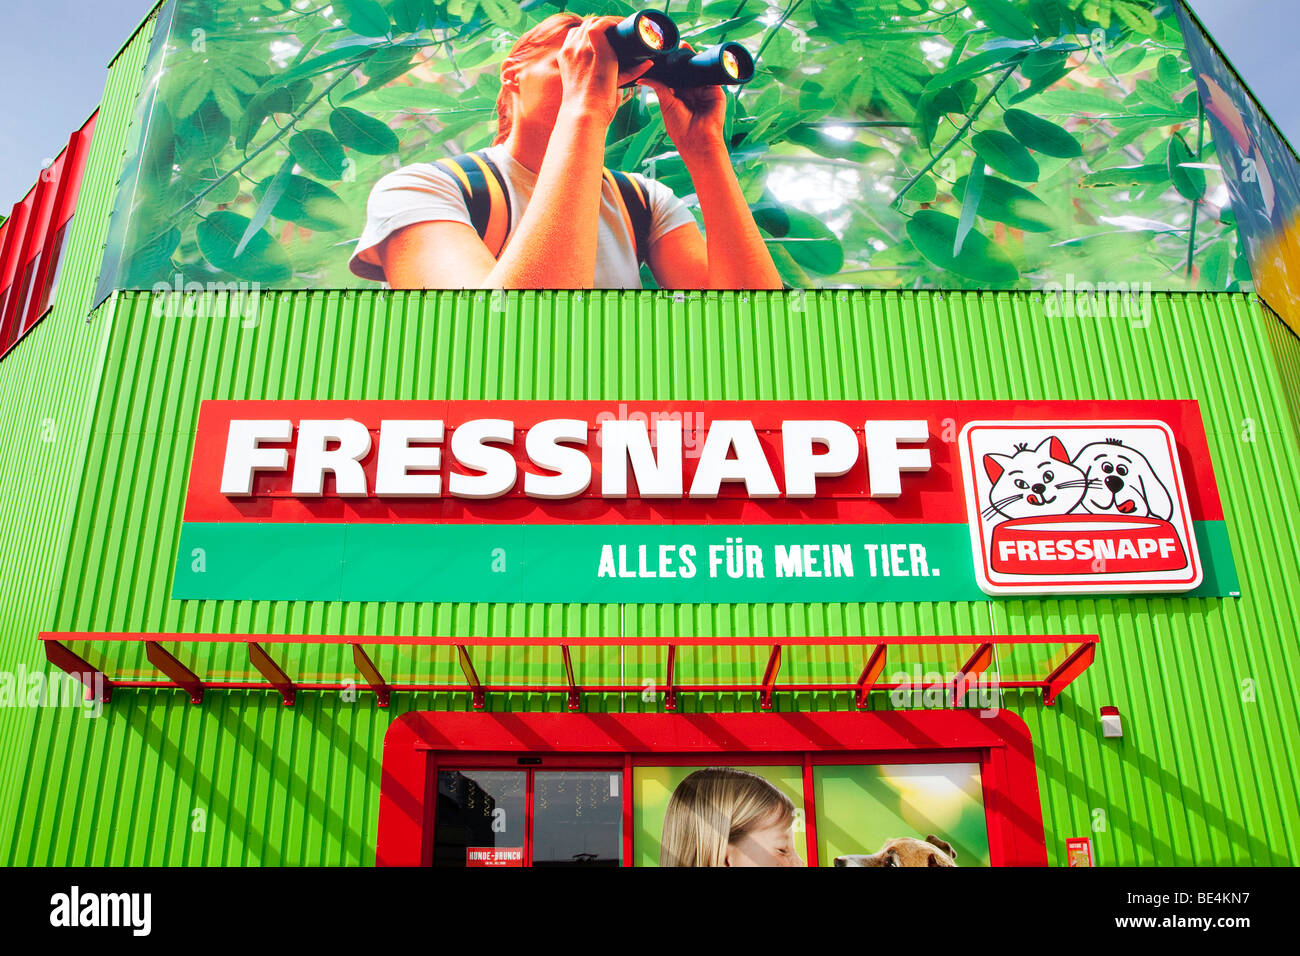 Fressnapf High Resolution Stock Photography and Images - Alamy